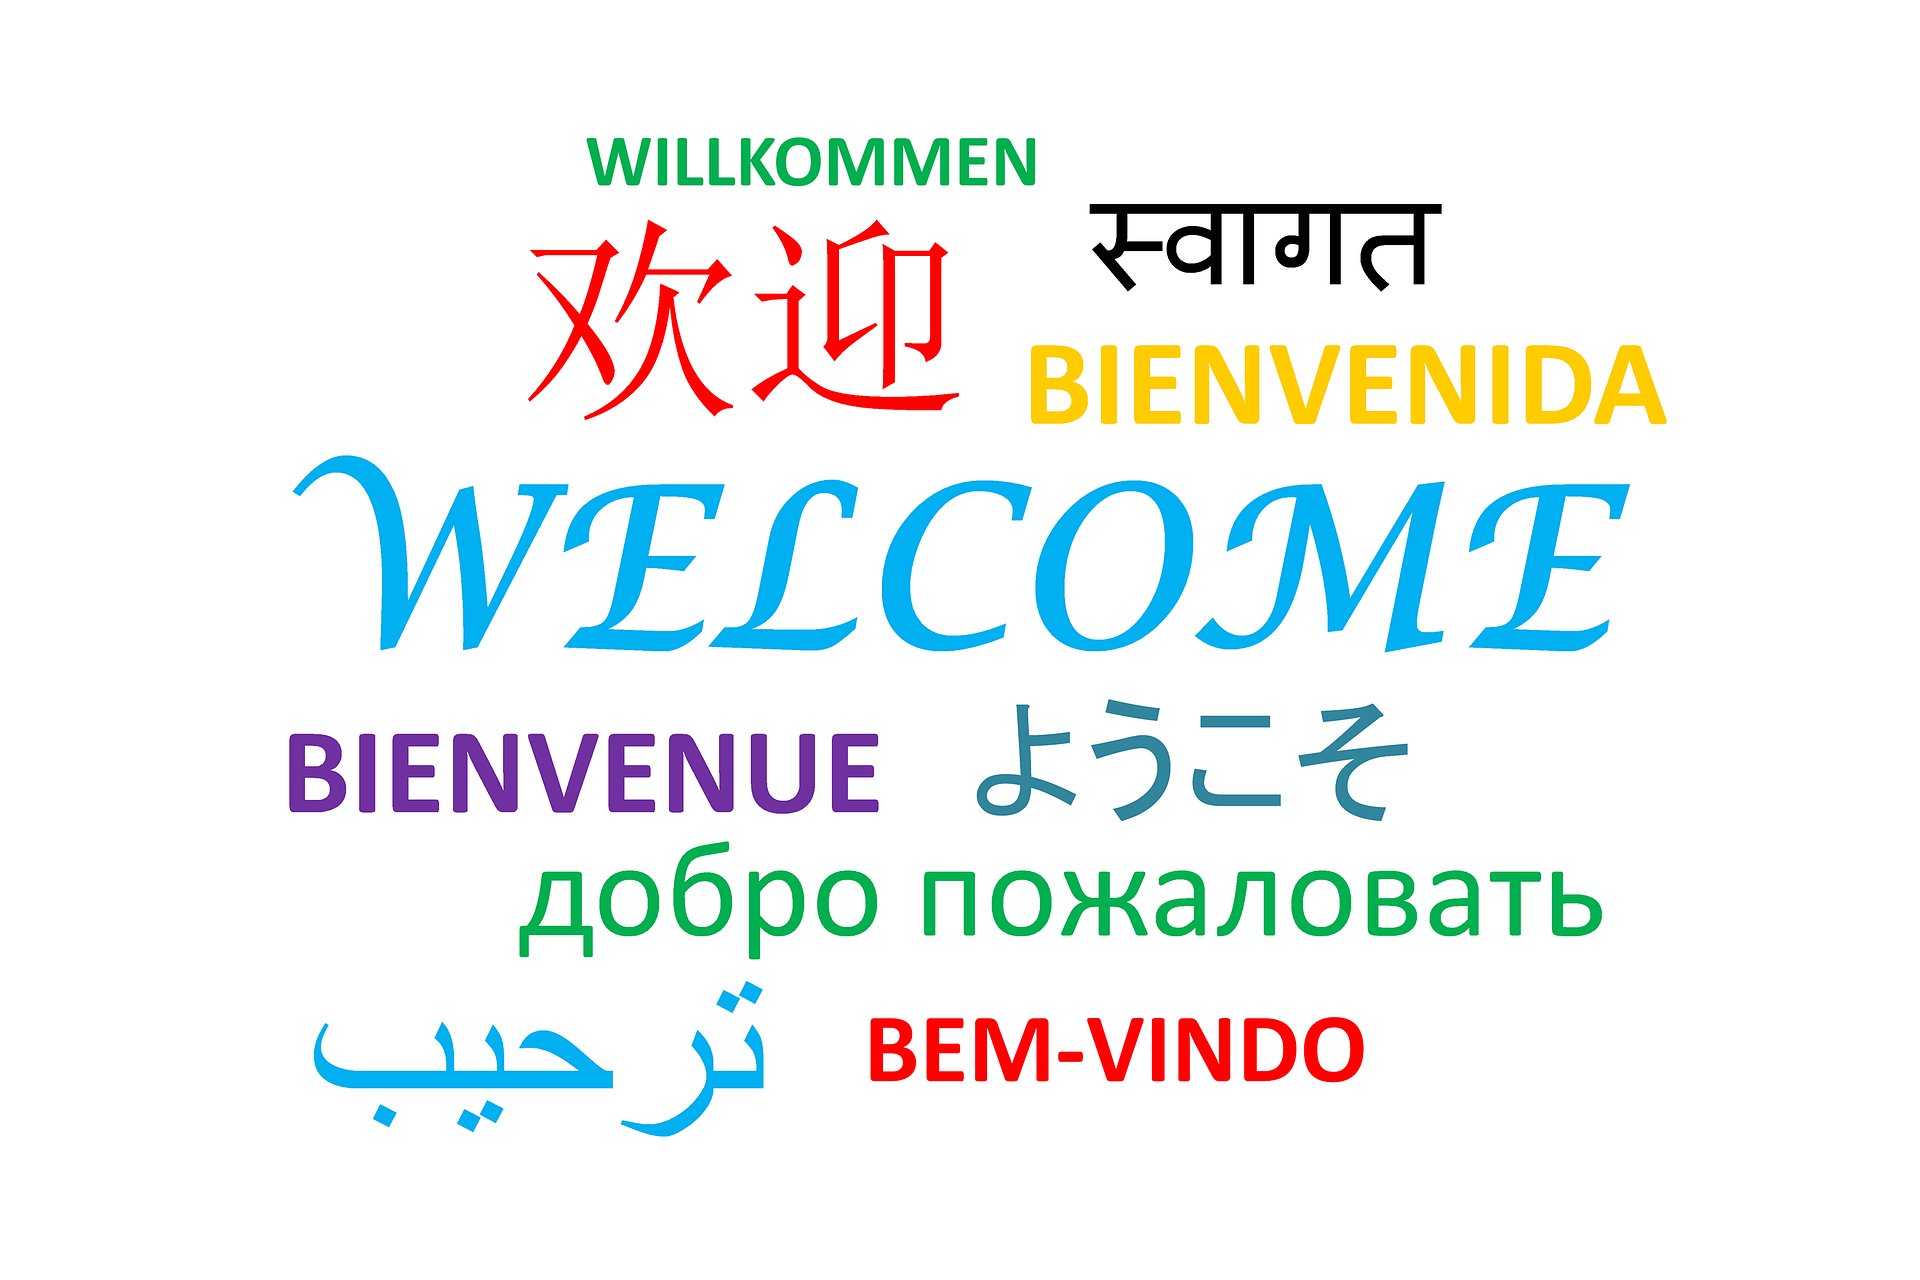 "Welcome" written in many languages